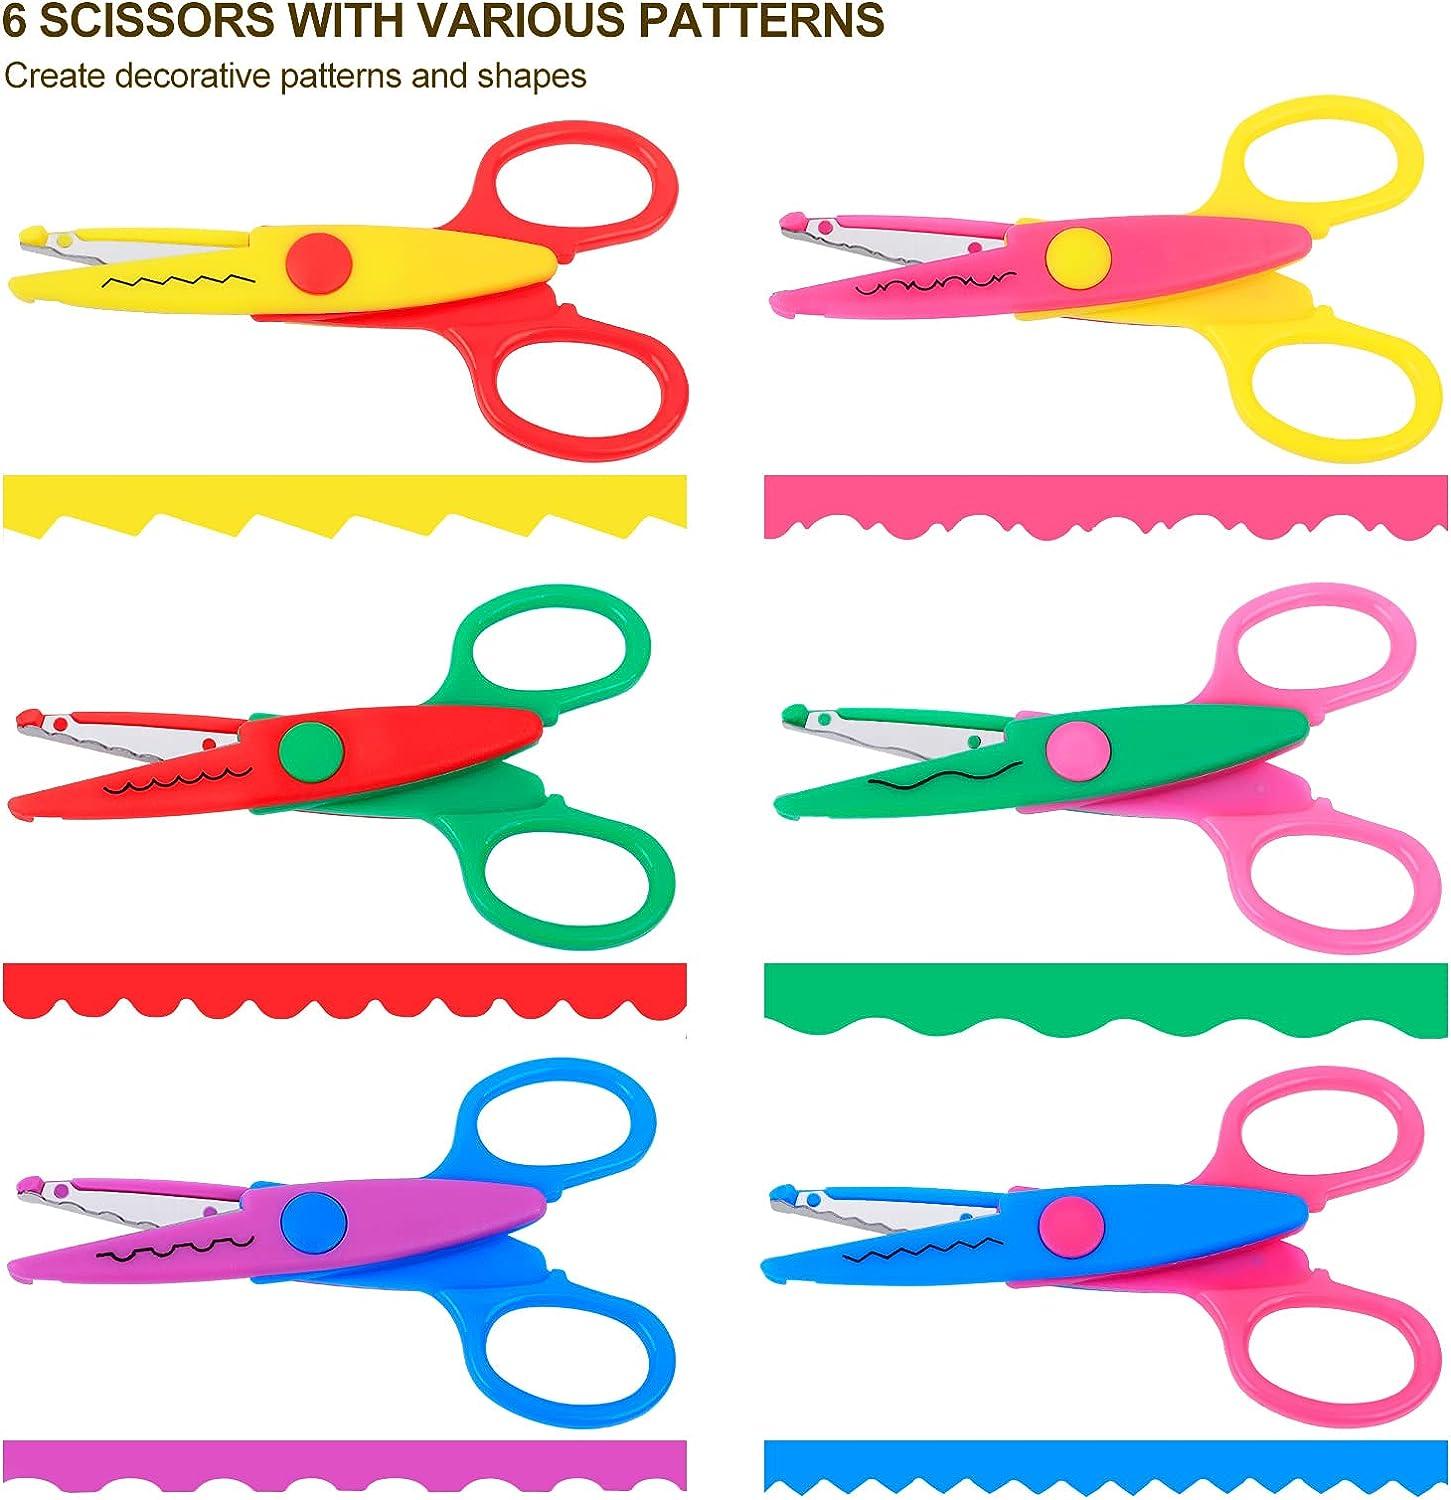  Training Scissors for Kids, Preschool Children Safety Scissors  Set - Safe Round Blunt Tip - Perfect for Developing Cutting Skills for Arts  & Crafts and School - Assorted Colors 